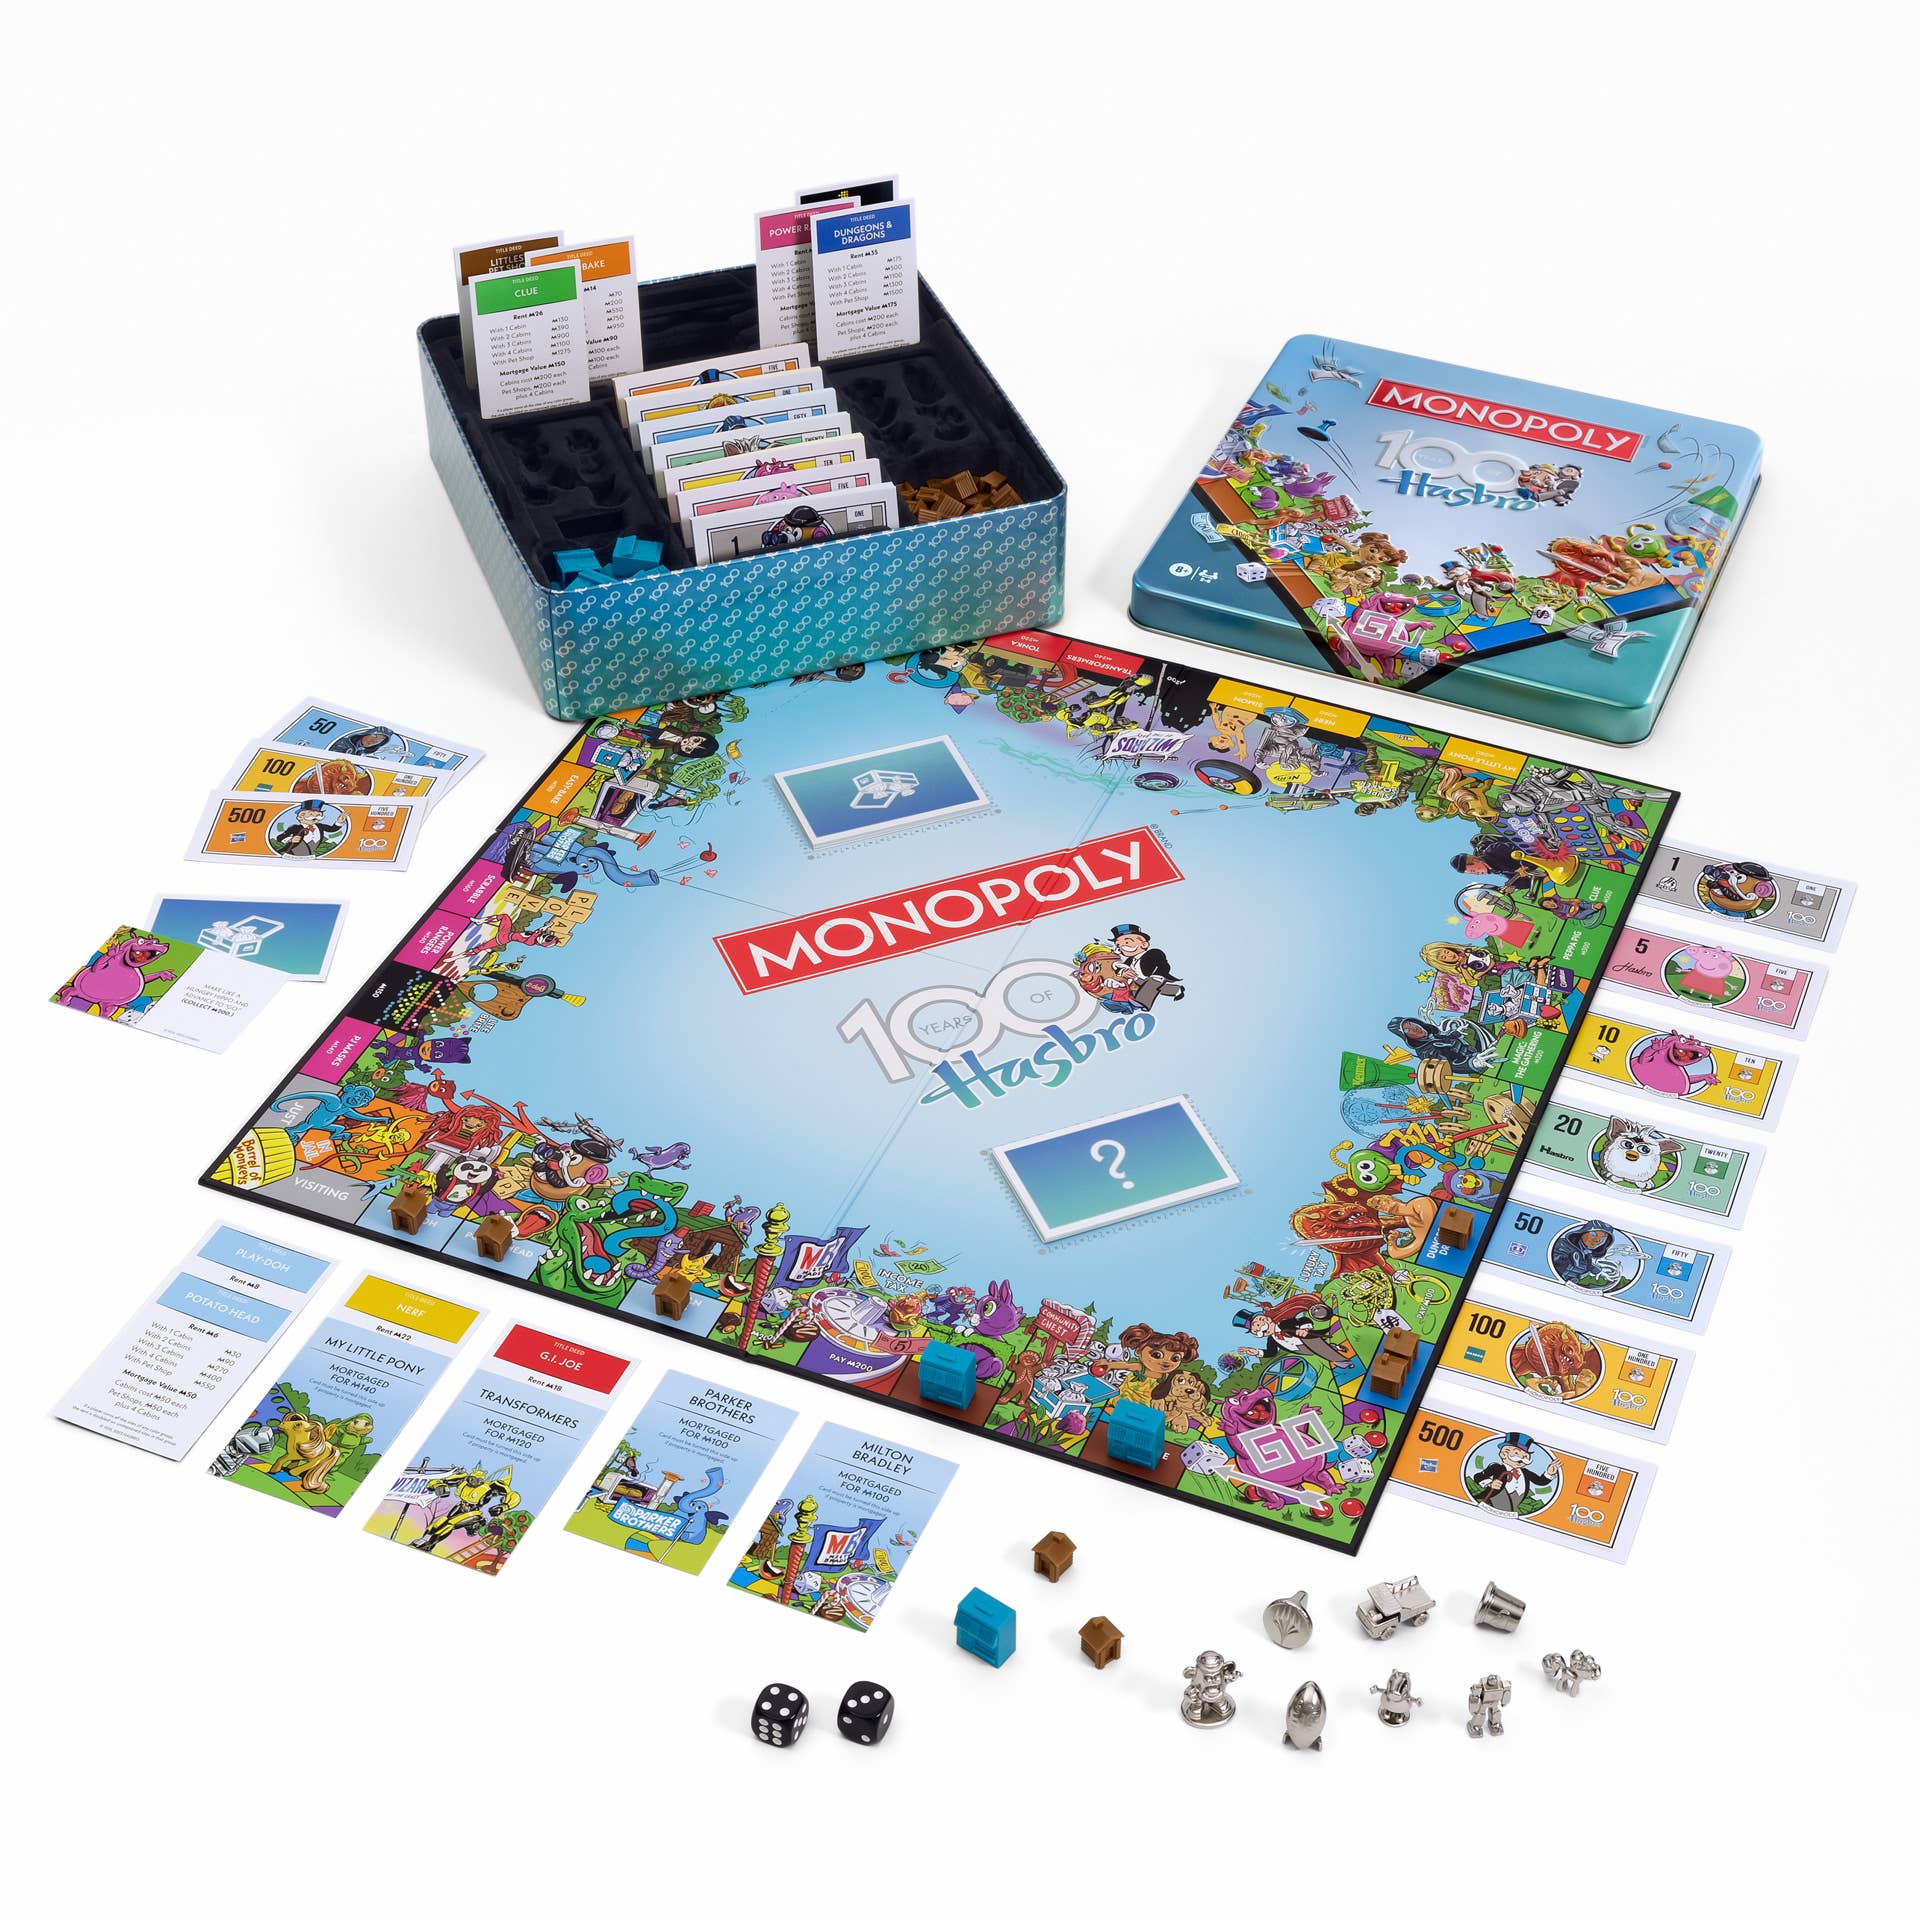 Monopoly Hasbro 100th Anniversary Edition - Bards & Cards